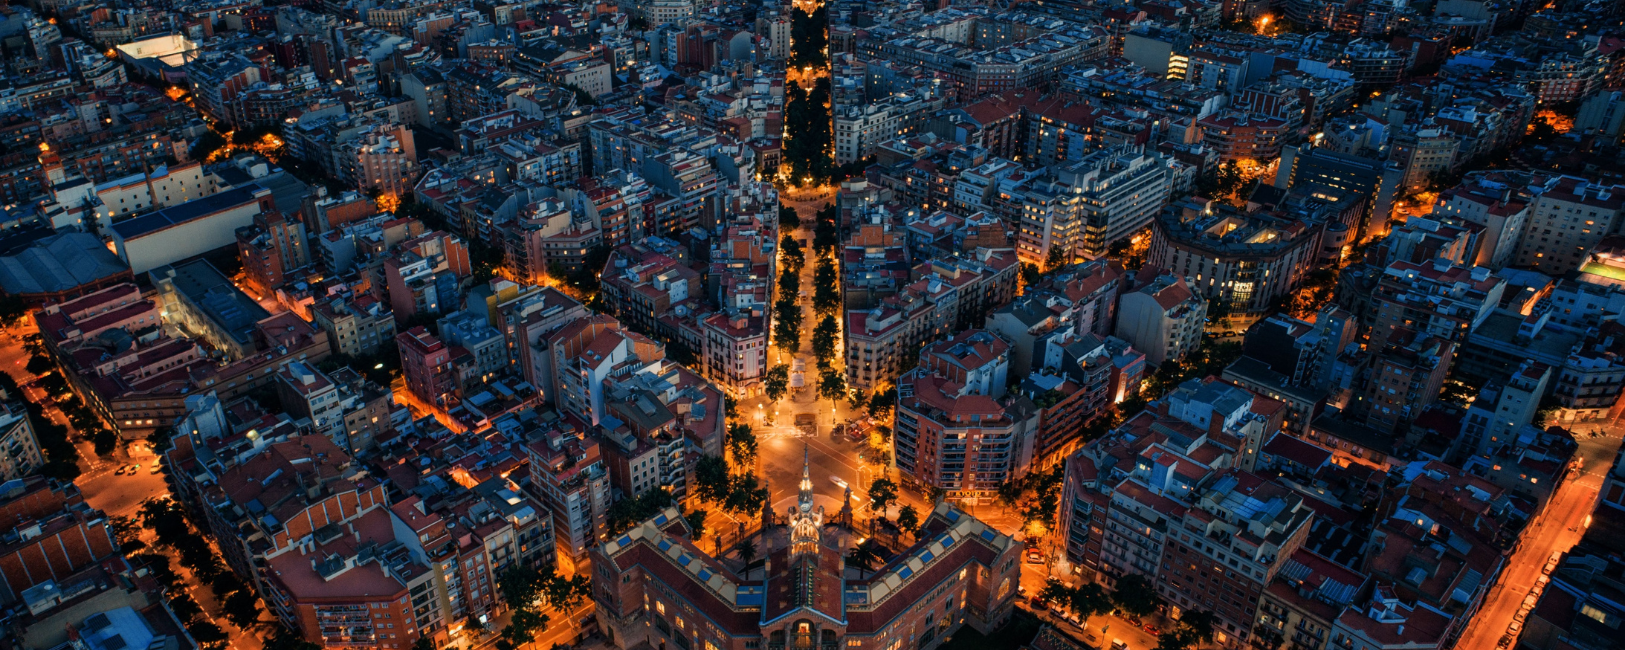 The Unforgettable Things to Do at Night in Barcelona